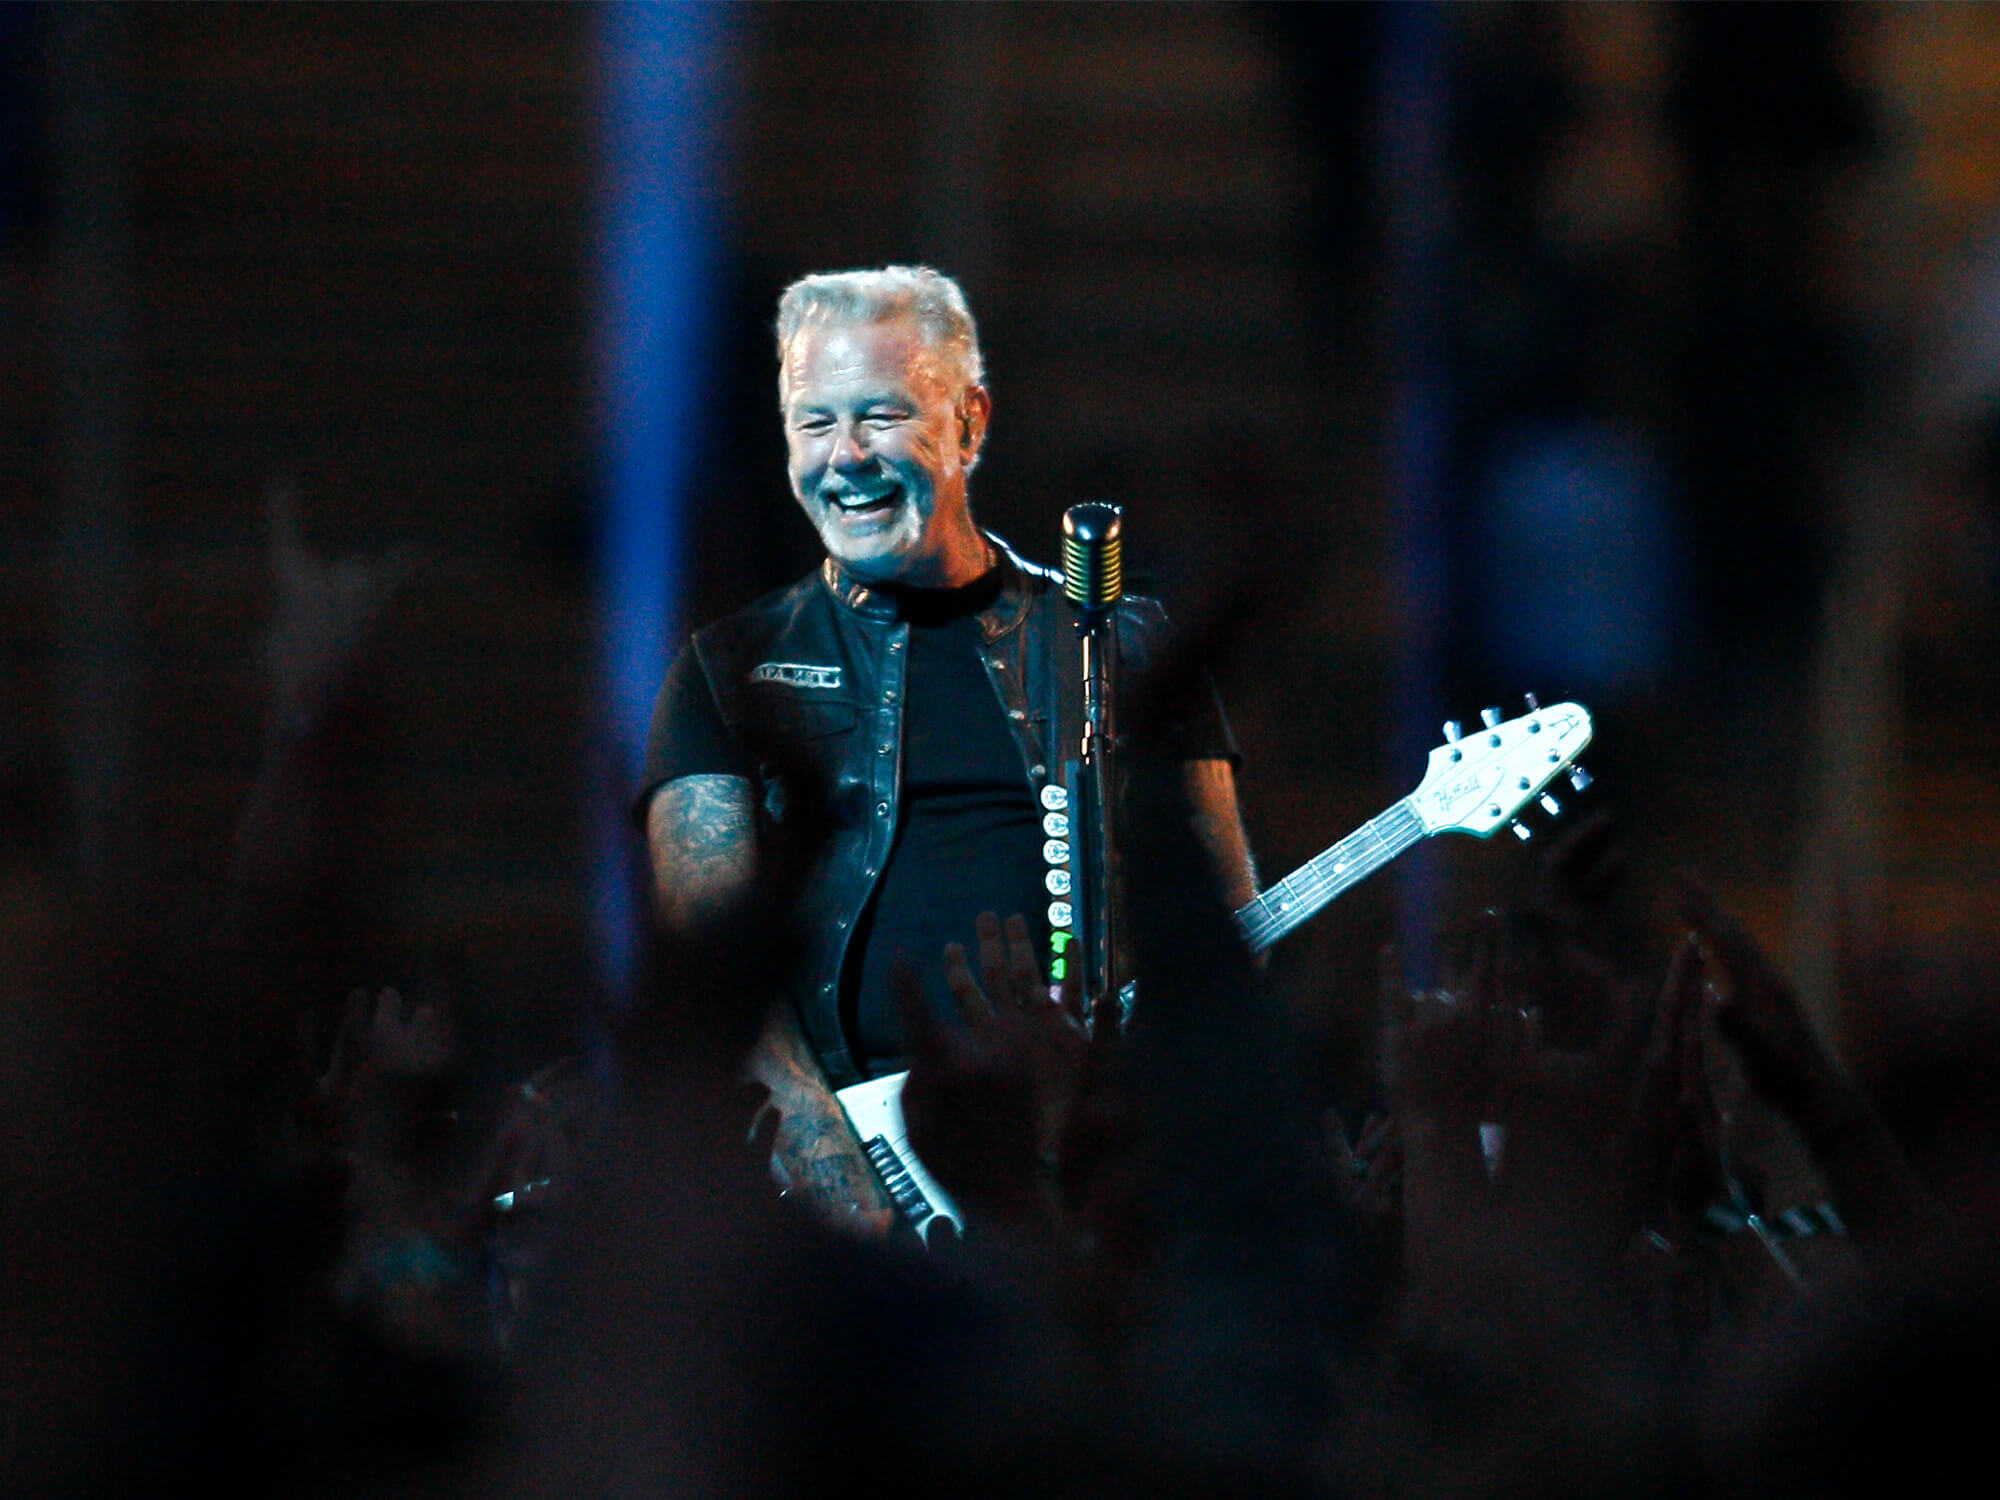 James Hetfield captured smiling at the crowd as he plays guitar in Munich on tour.